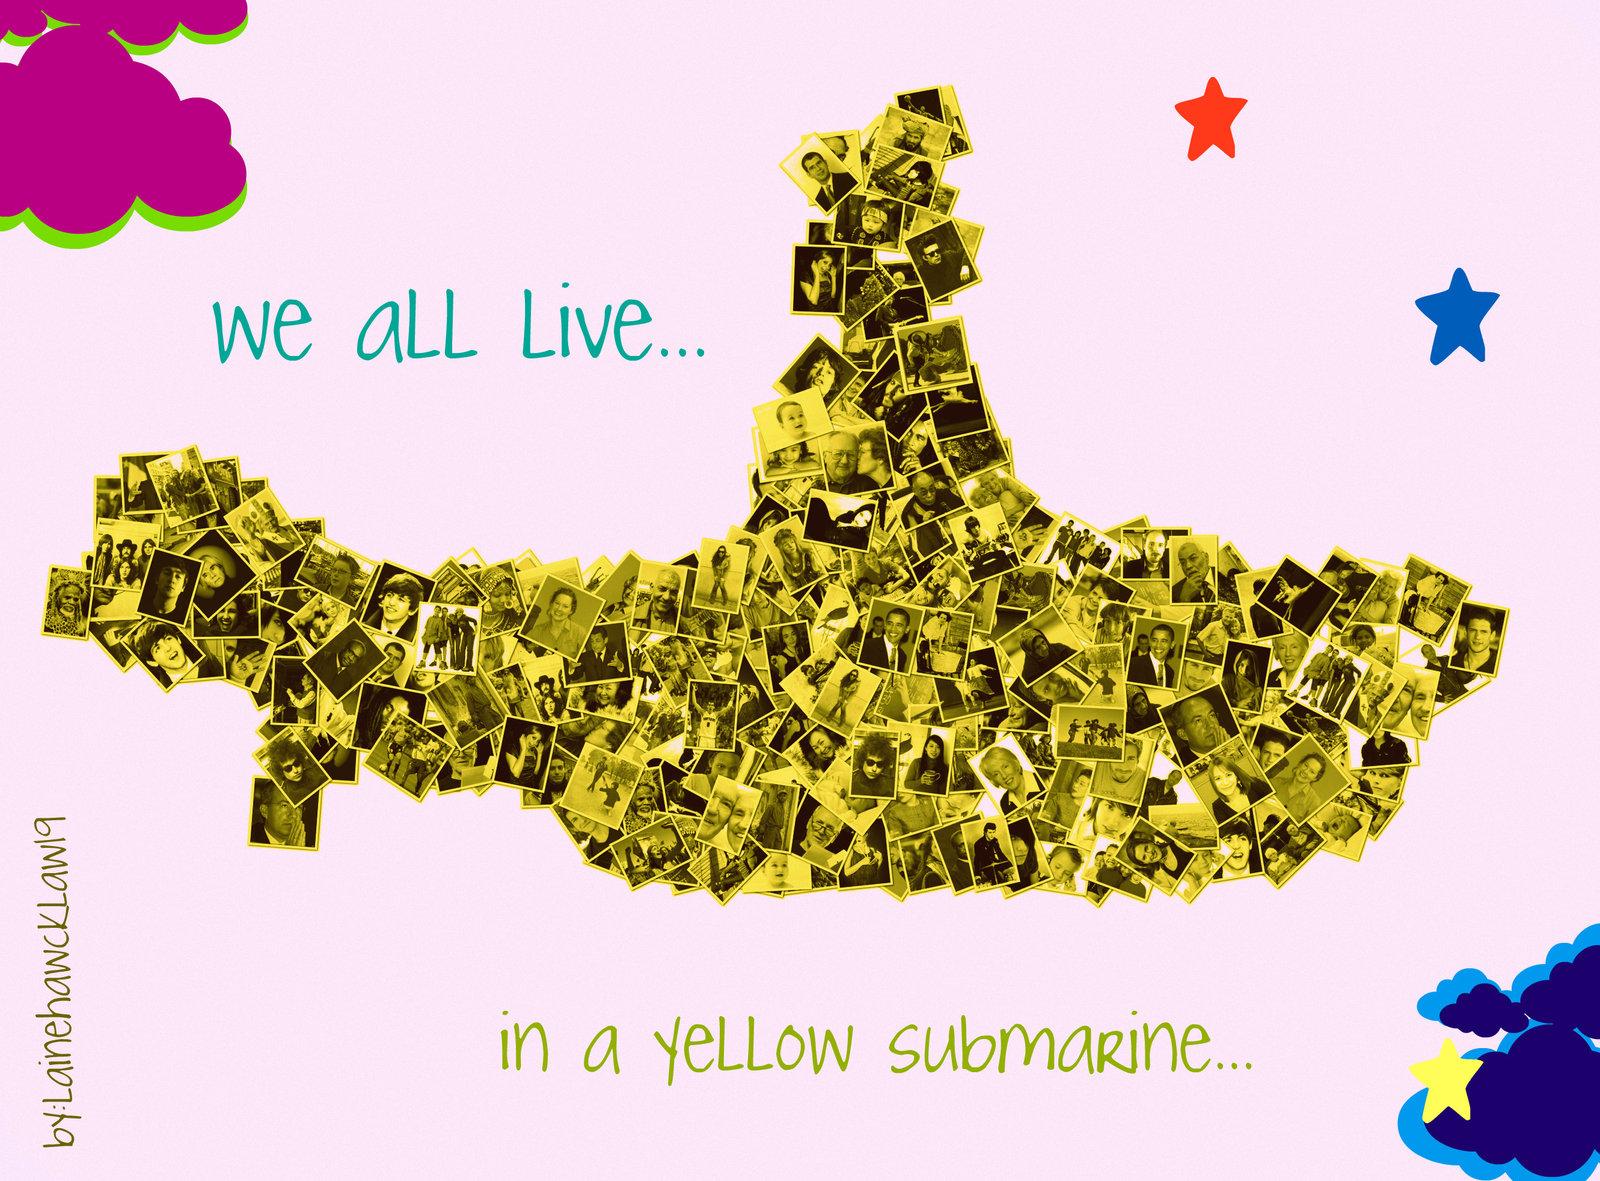 Best image about yellow Submarine Chuck taylors 1600x1181